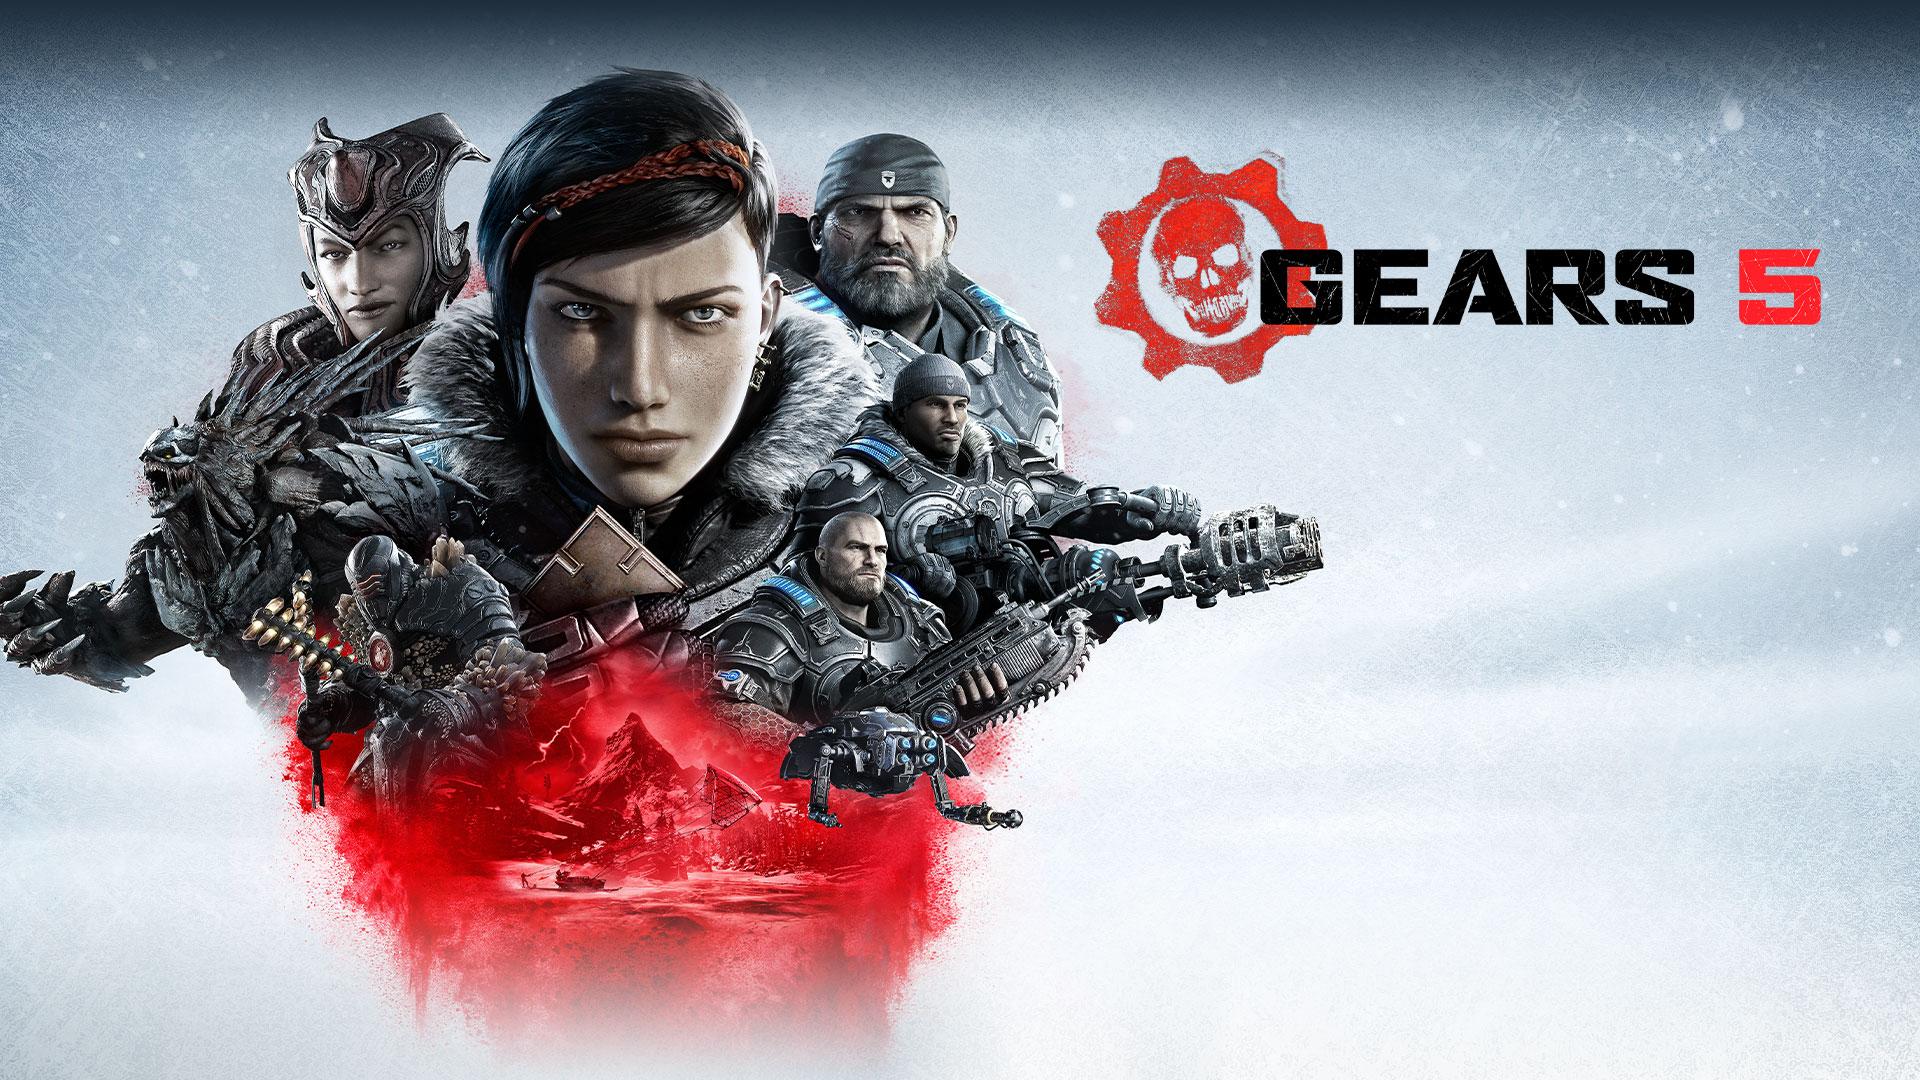 Gears 5 for Xbox One and Windows 10